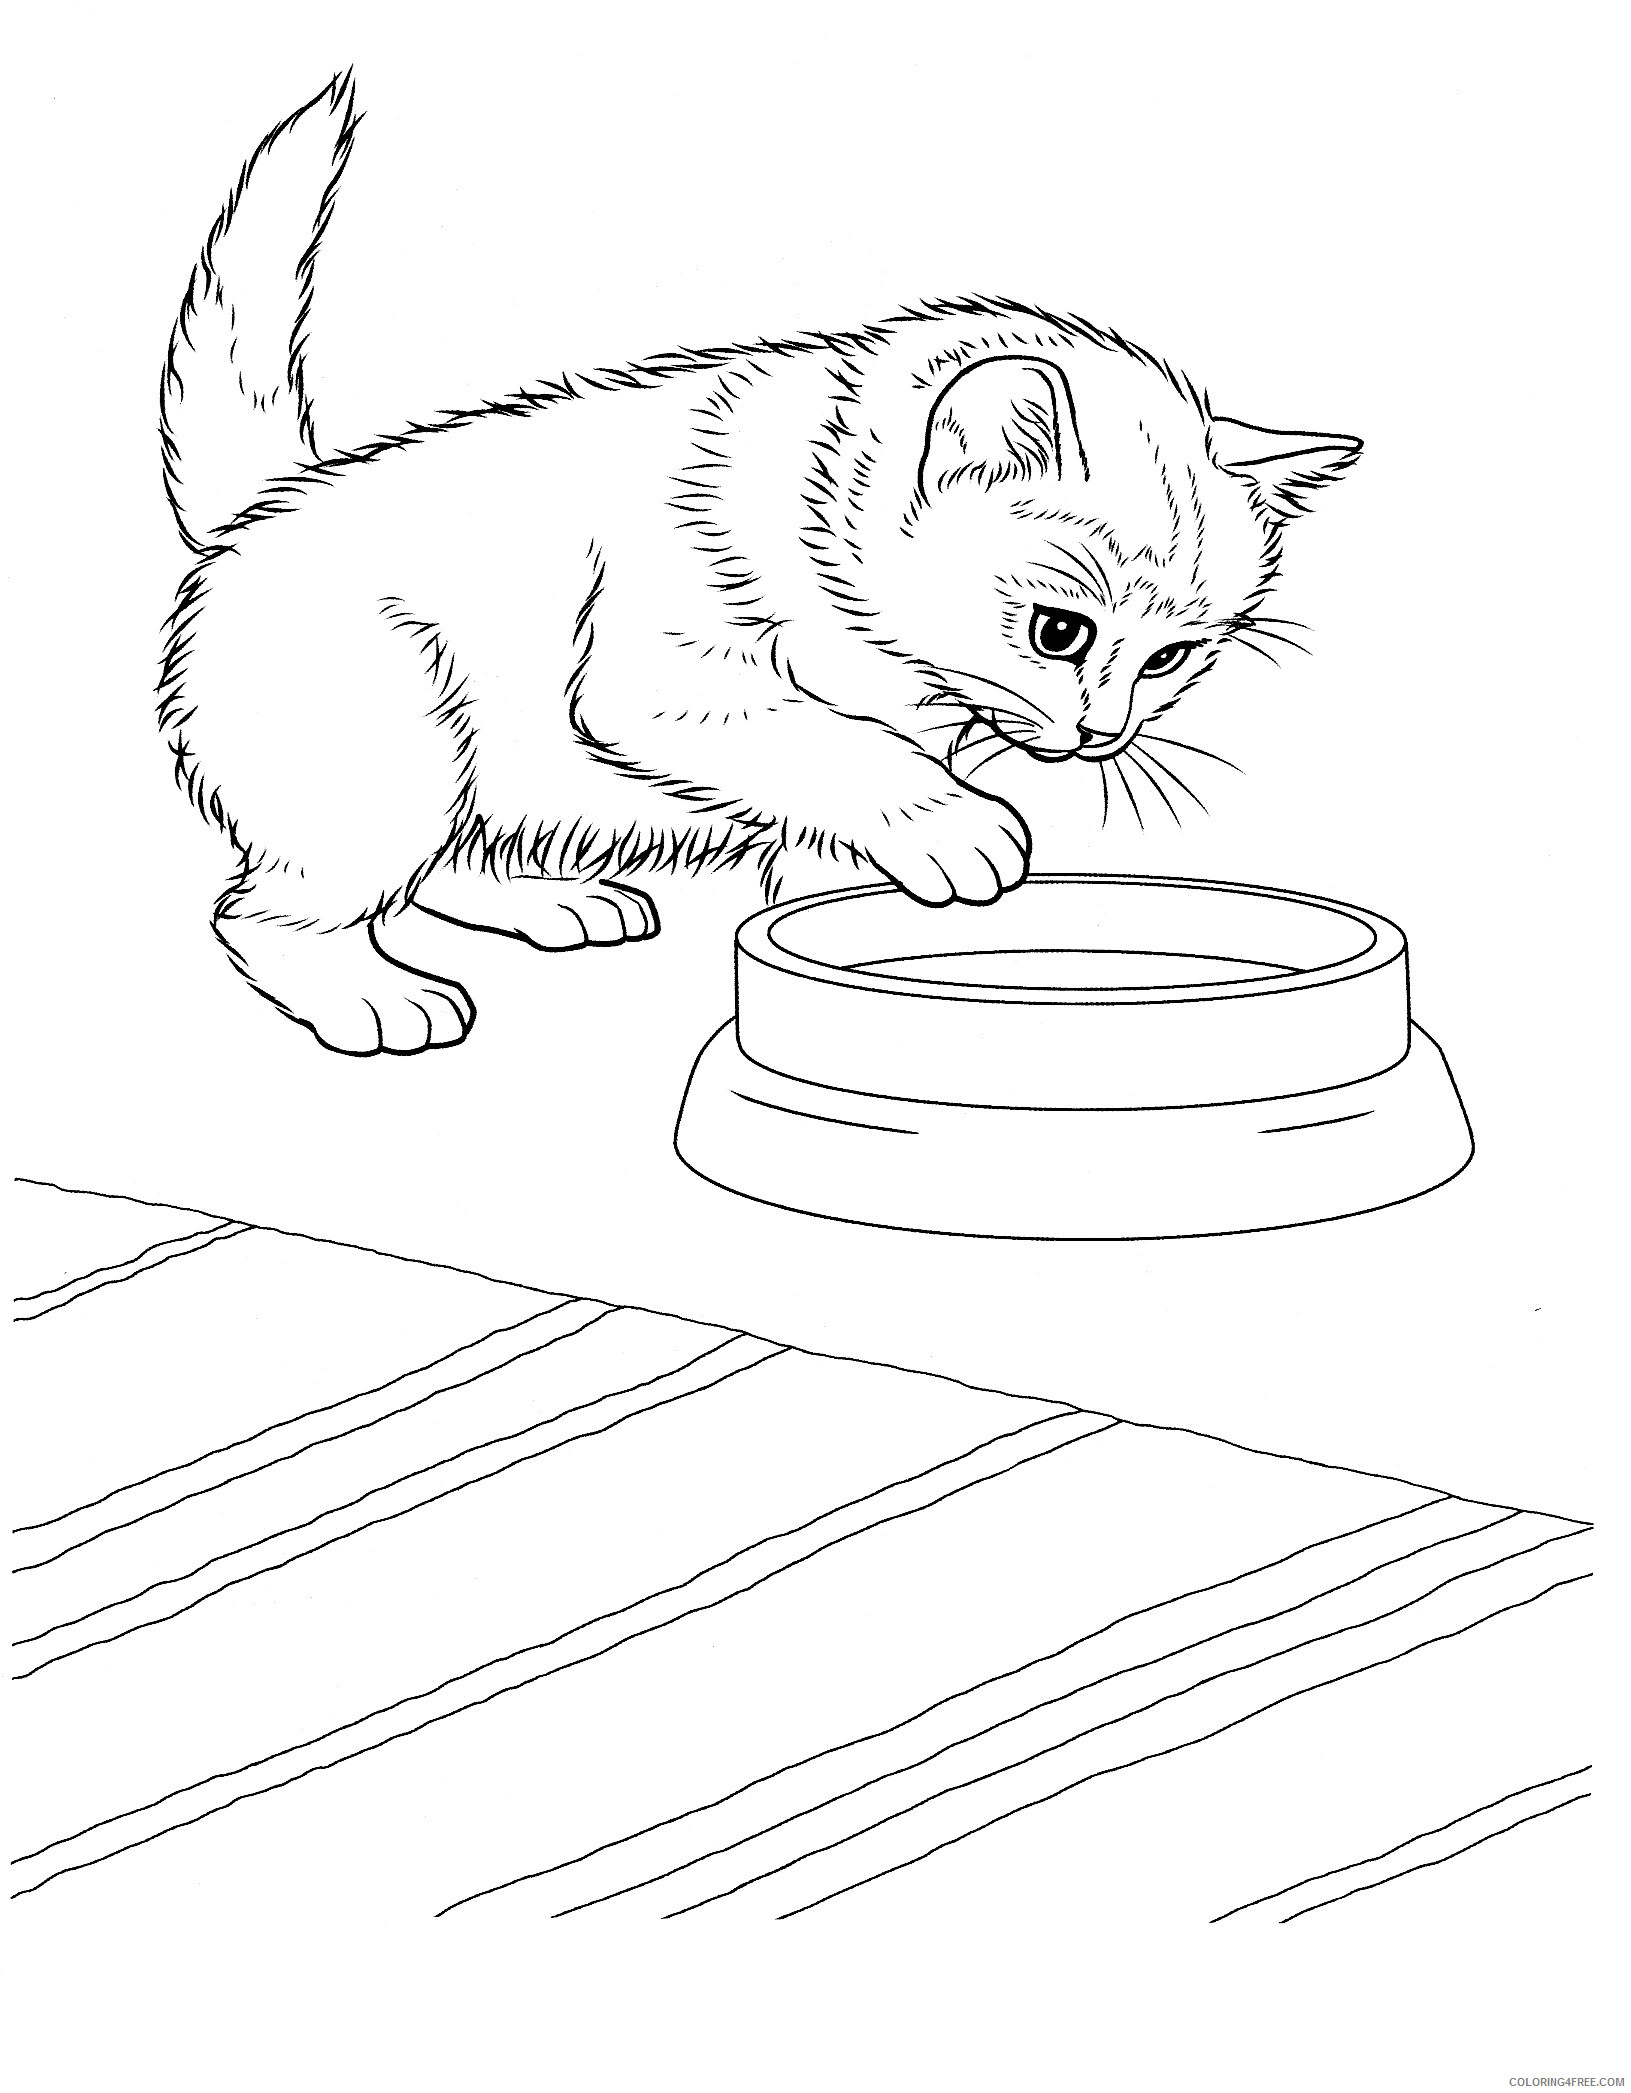 Kitten Coloring Pages Animal Printable Sheets free kitten for kids 2021 2990 Coloring4free